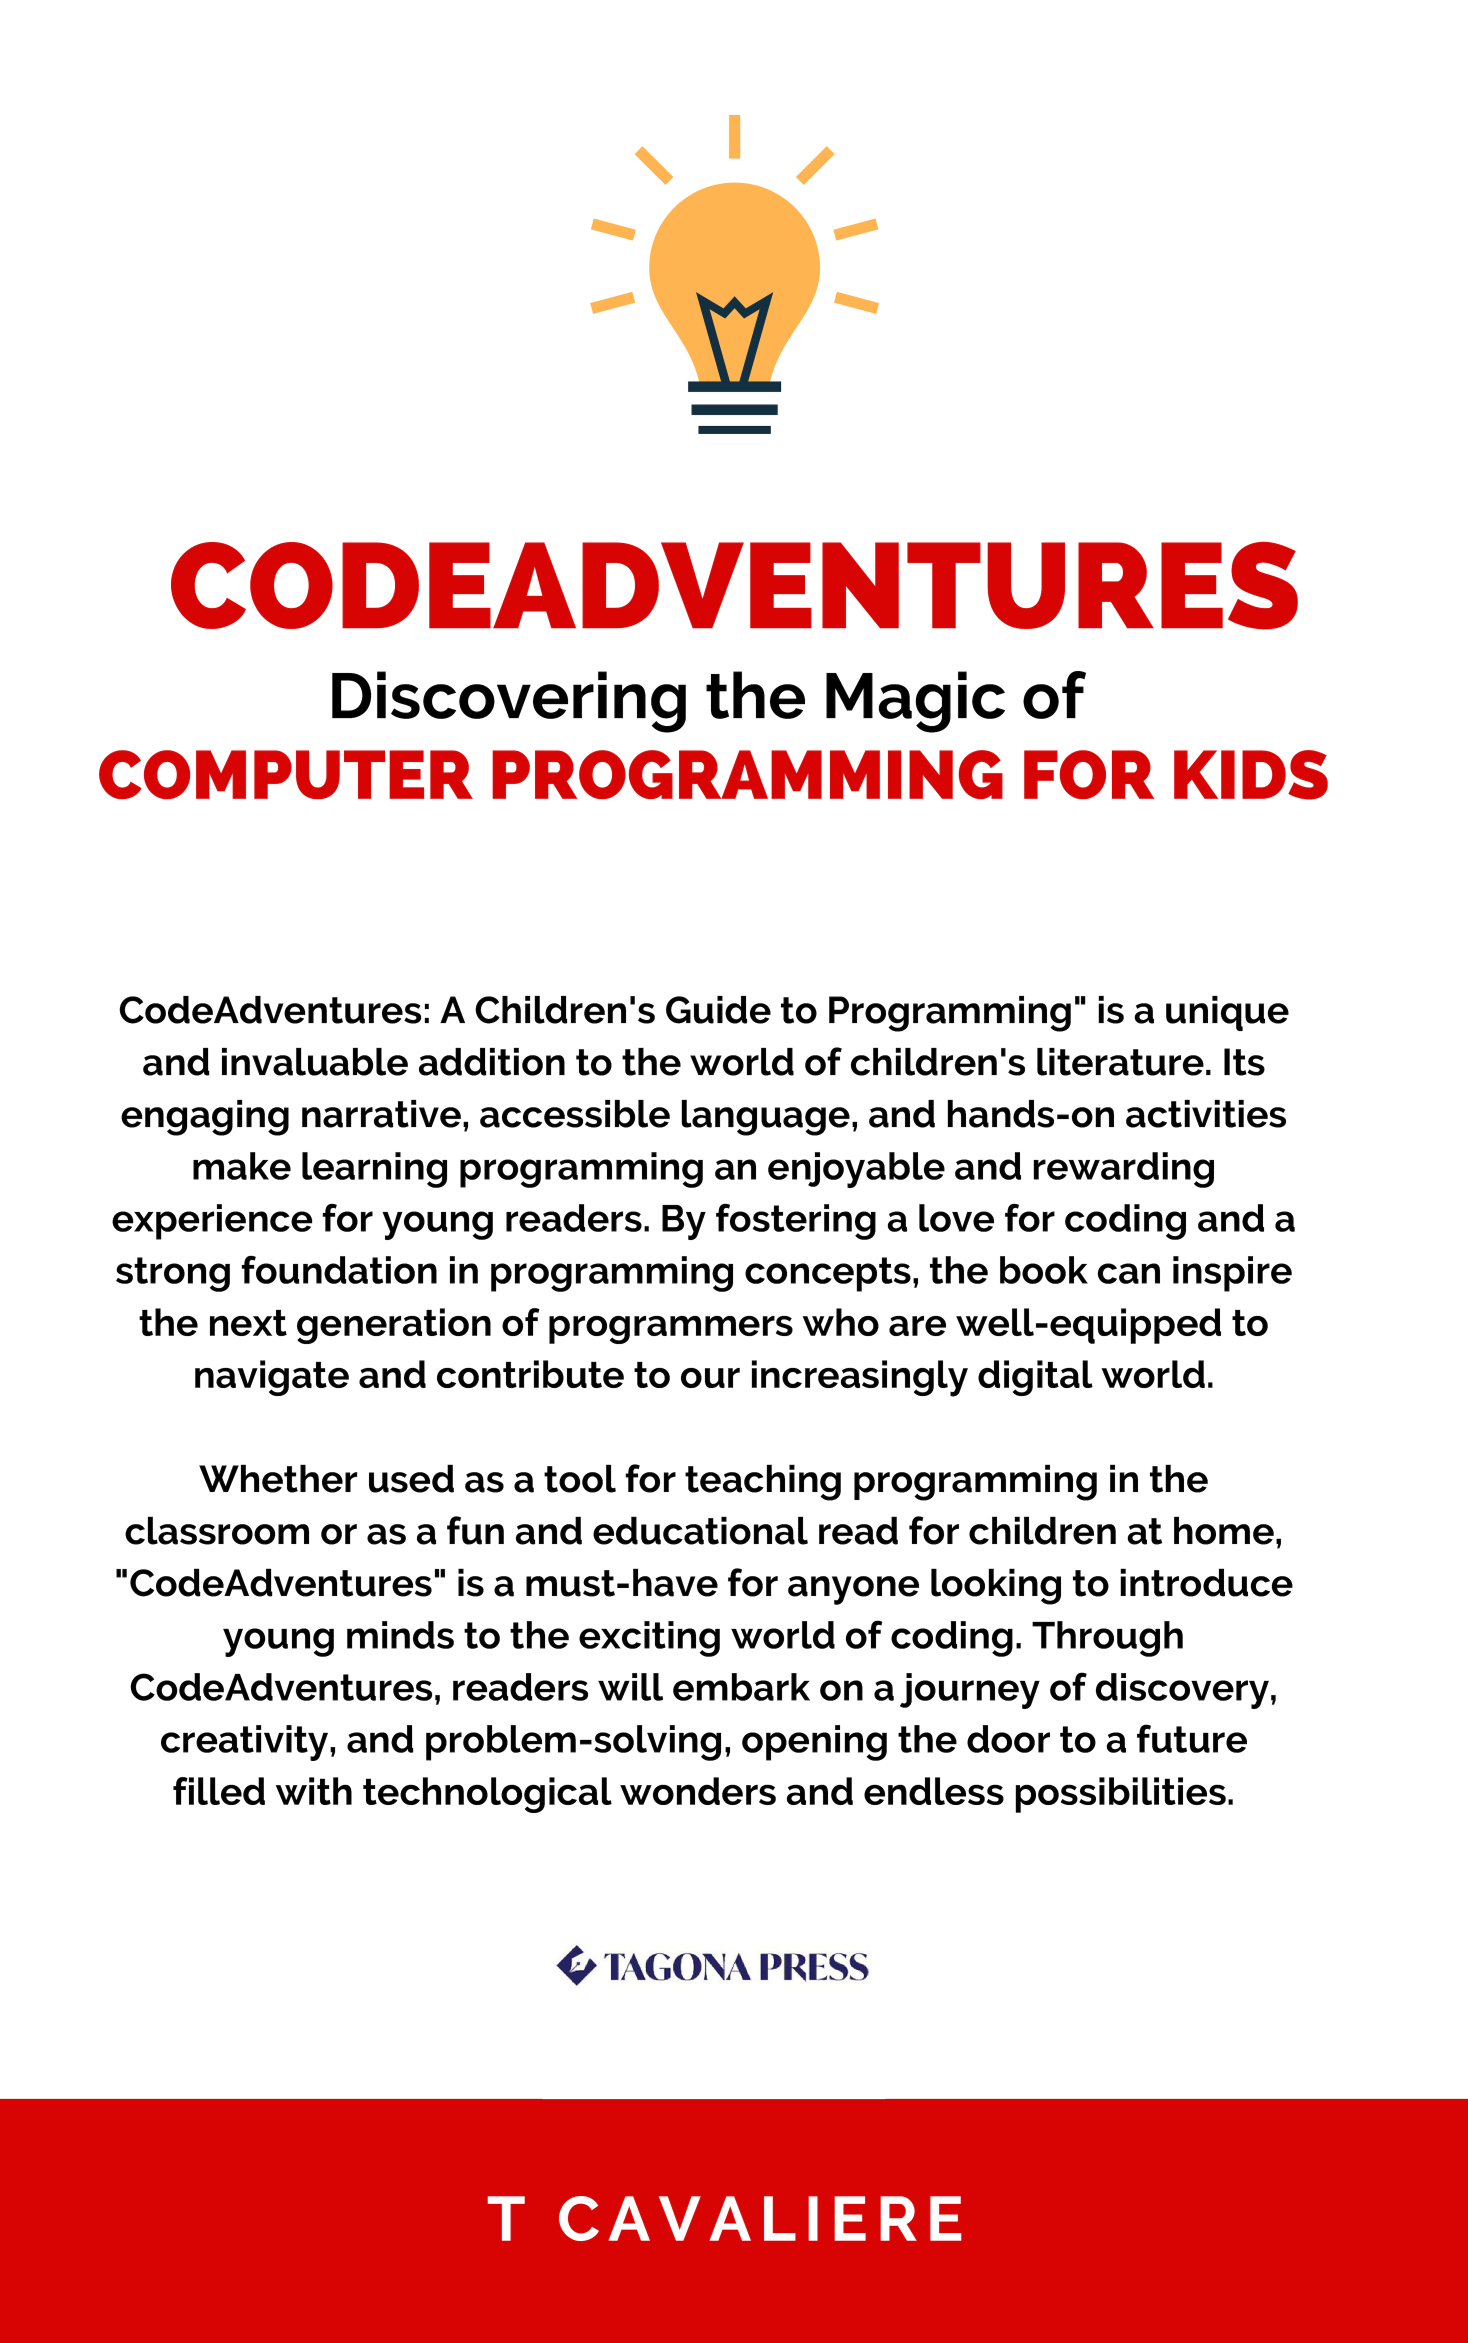 Engaging Code Adventures: Interactive Learning for Kids